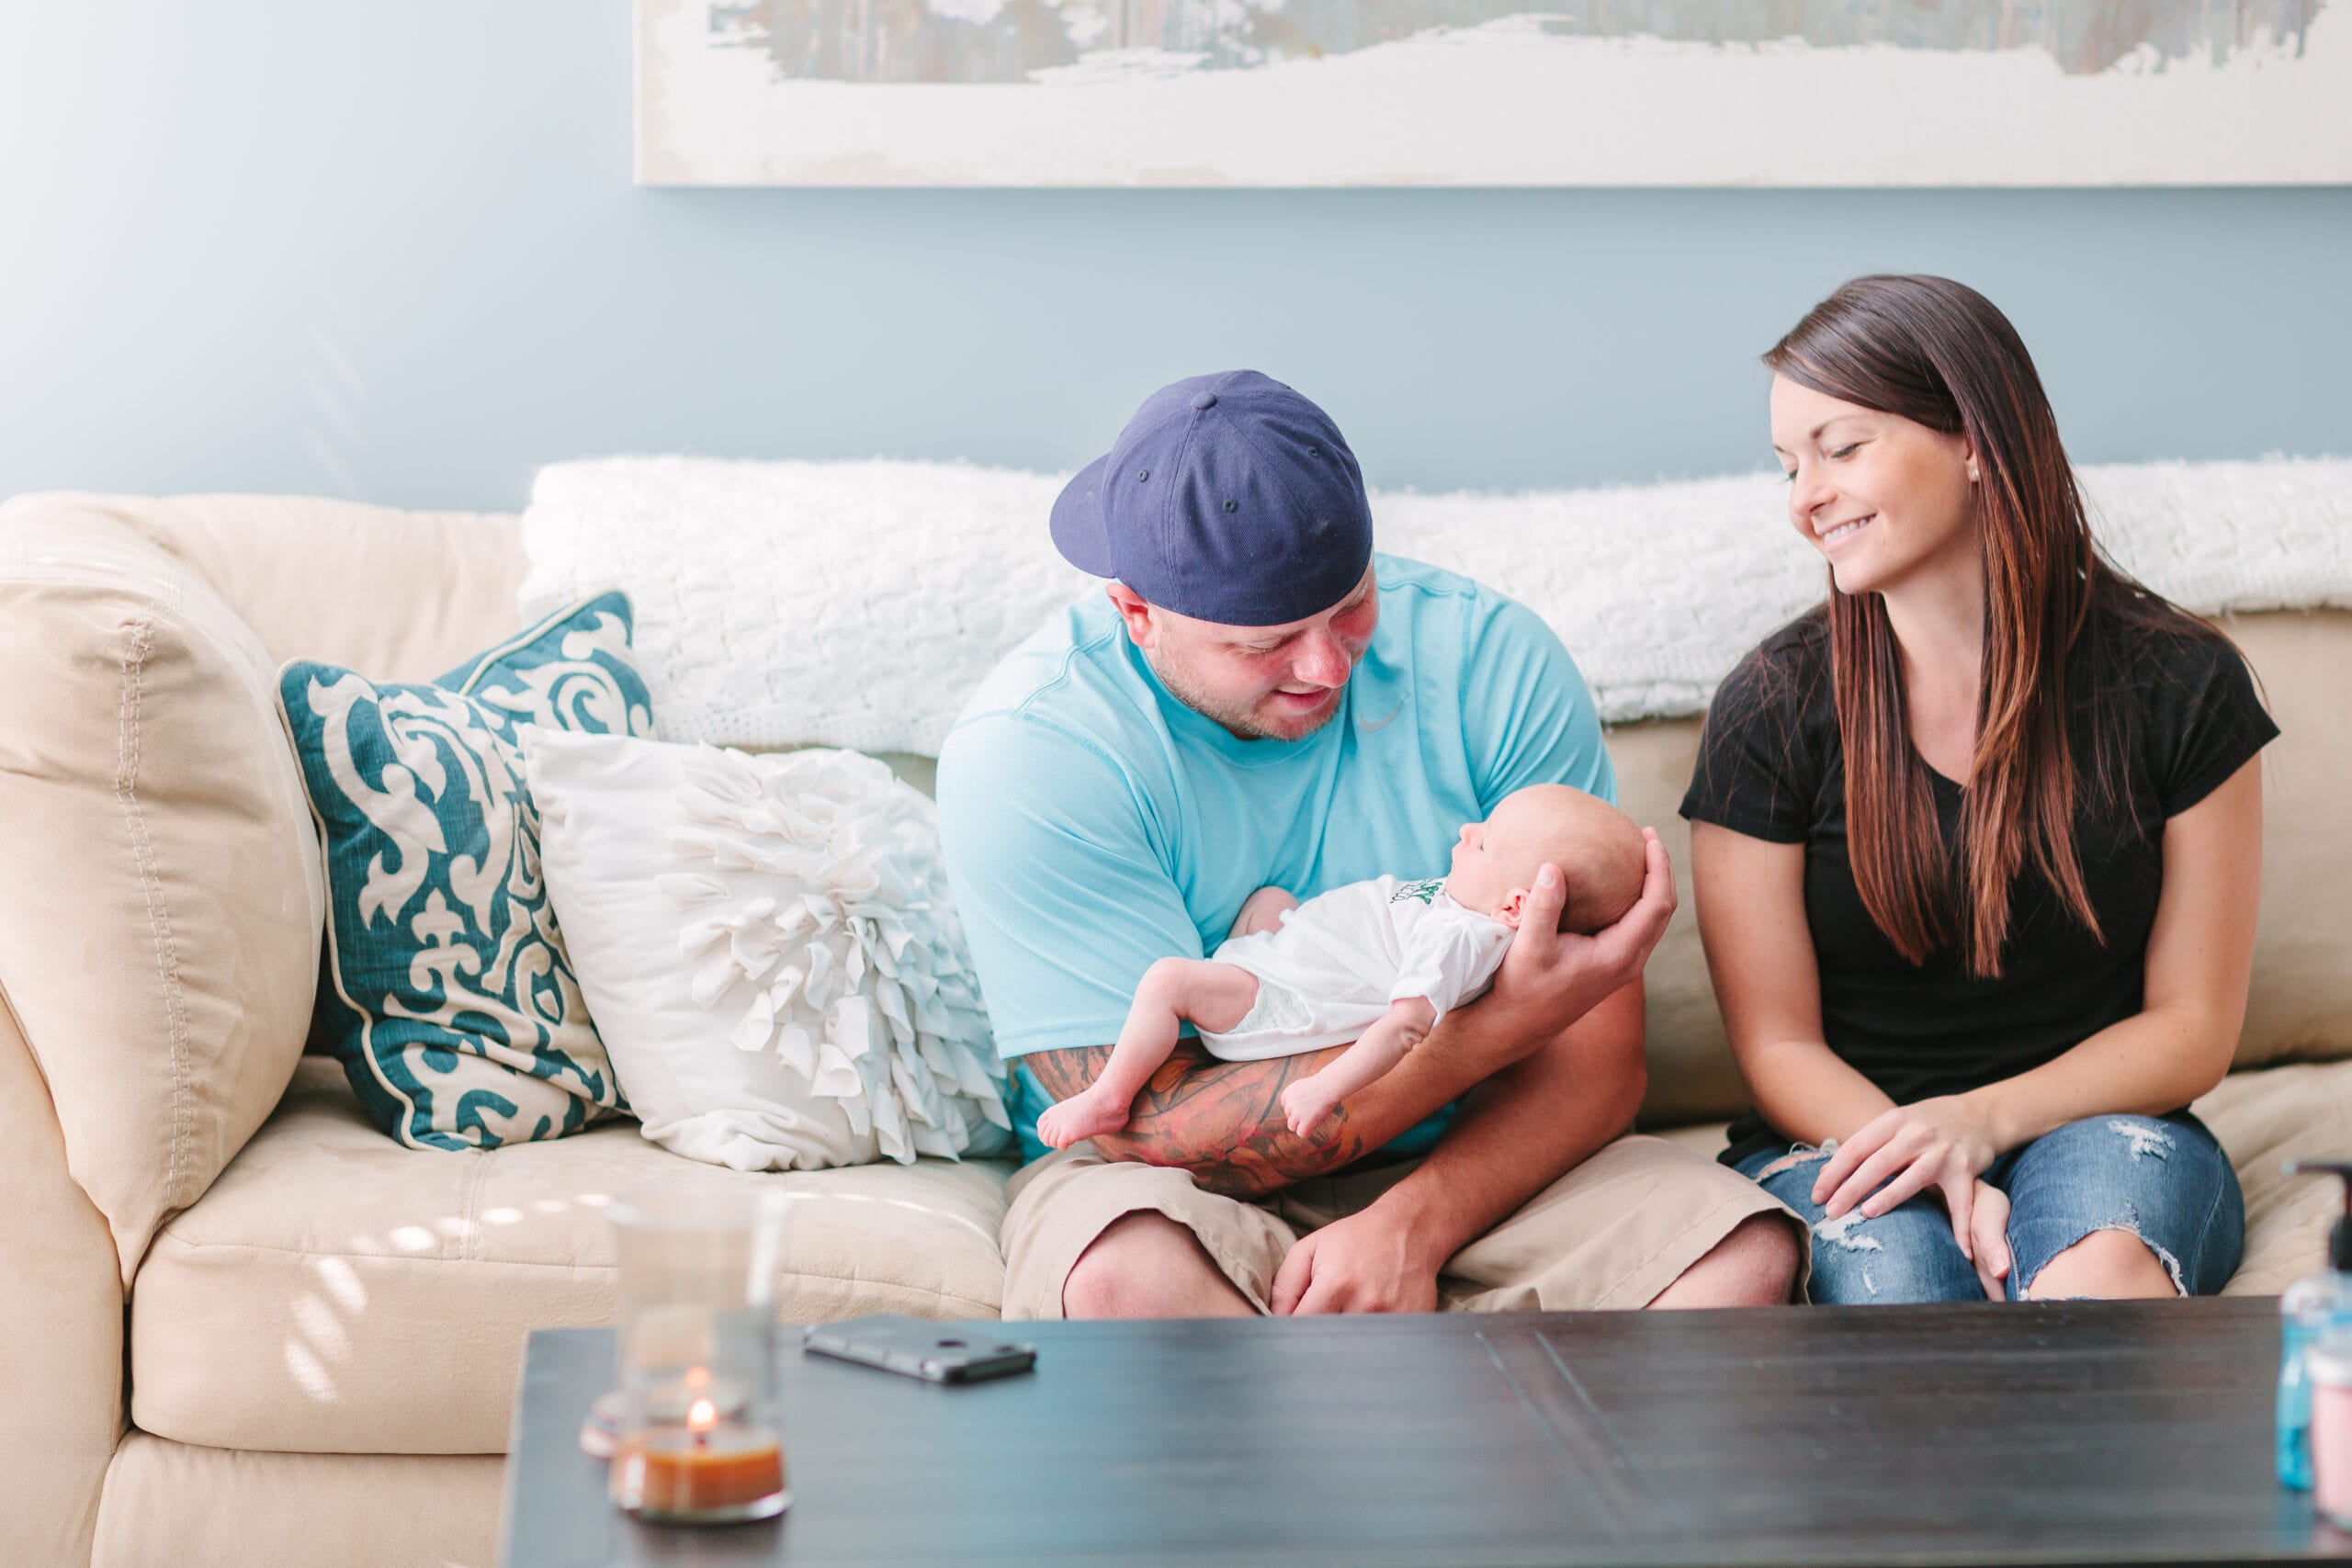 Maryland Newborn Photography by Lauren Myers Photography #Newborn #NewbornPhotography